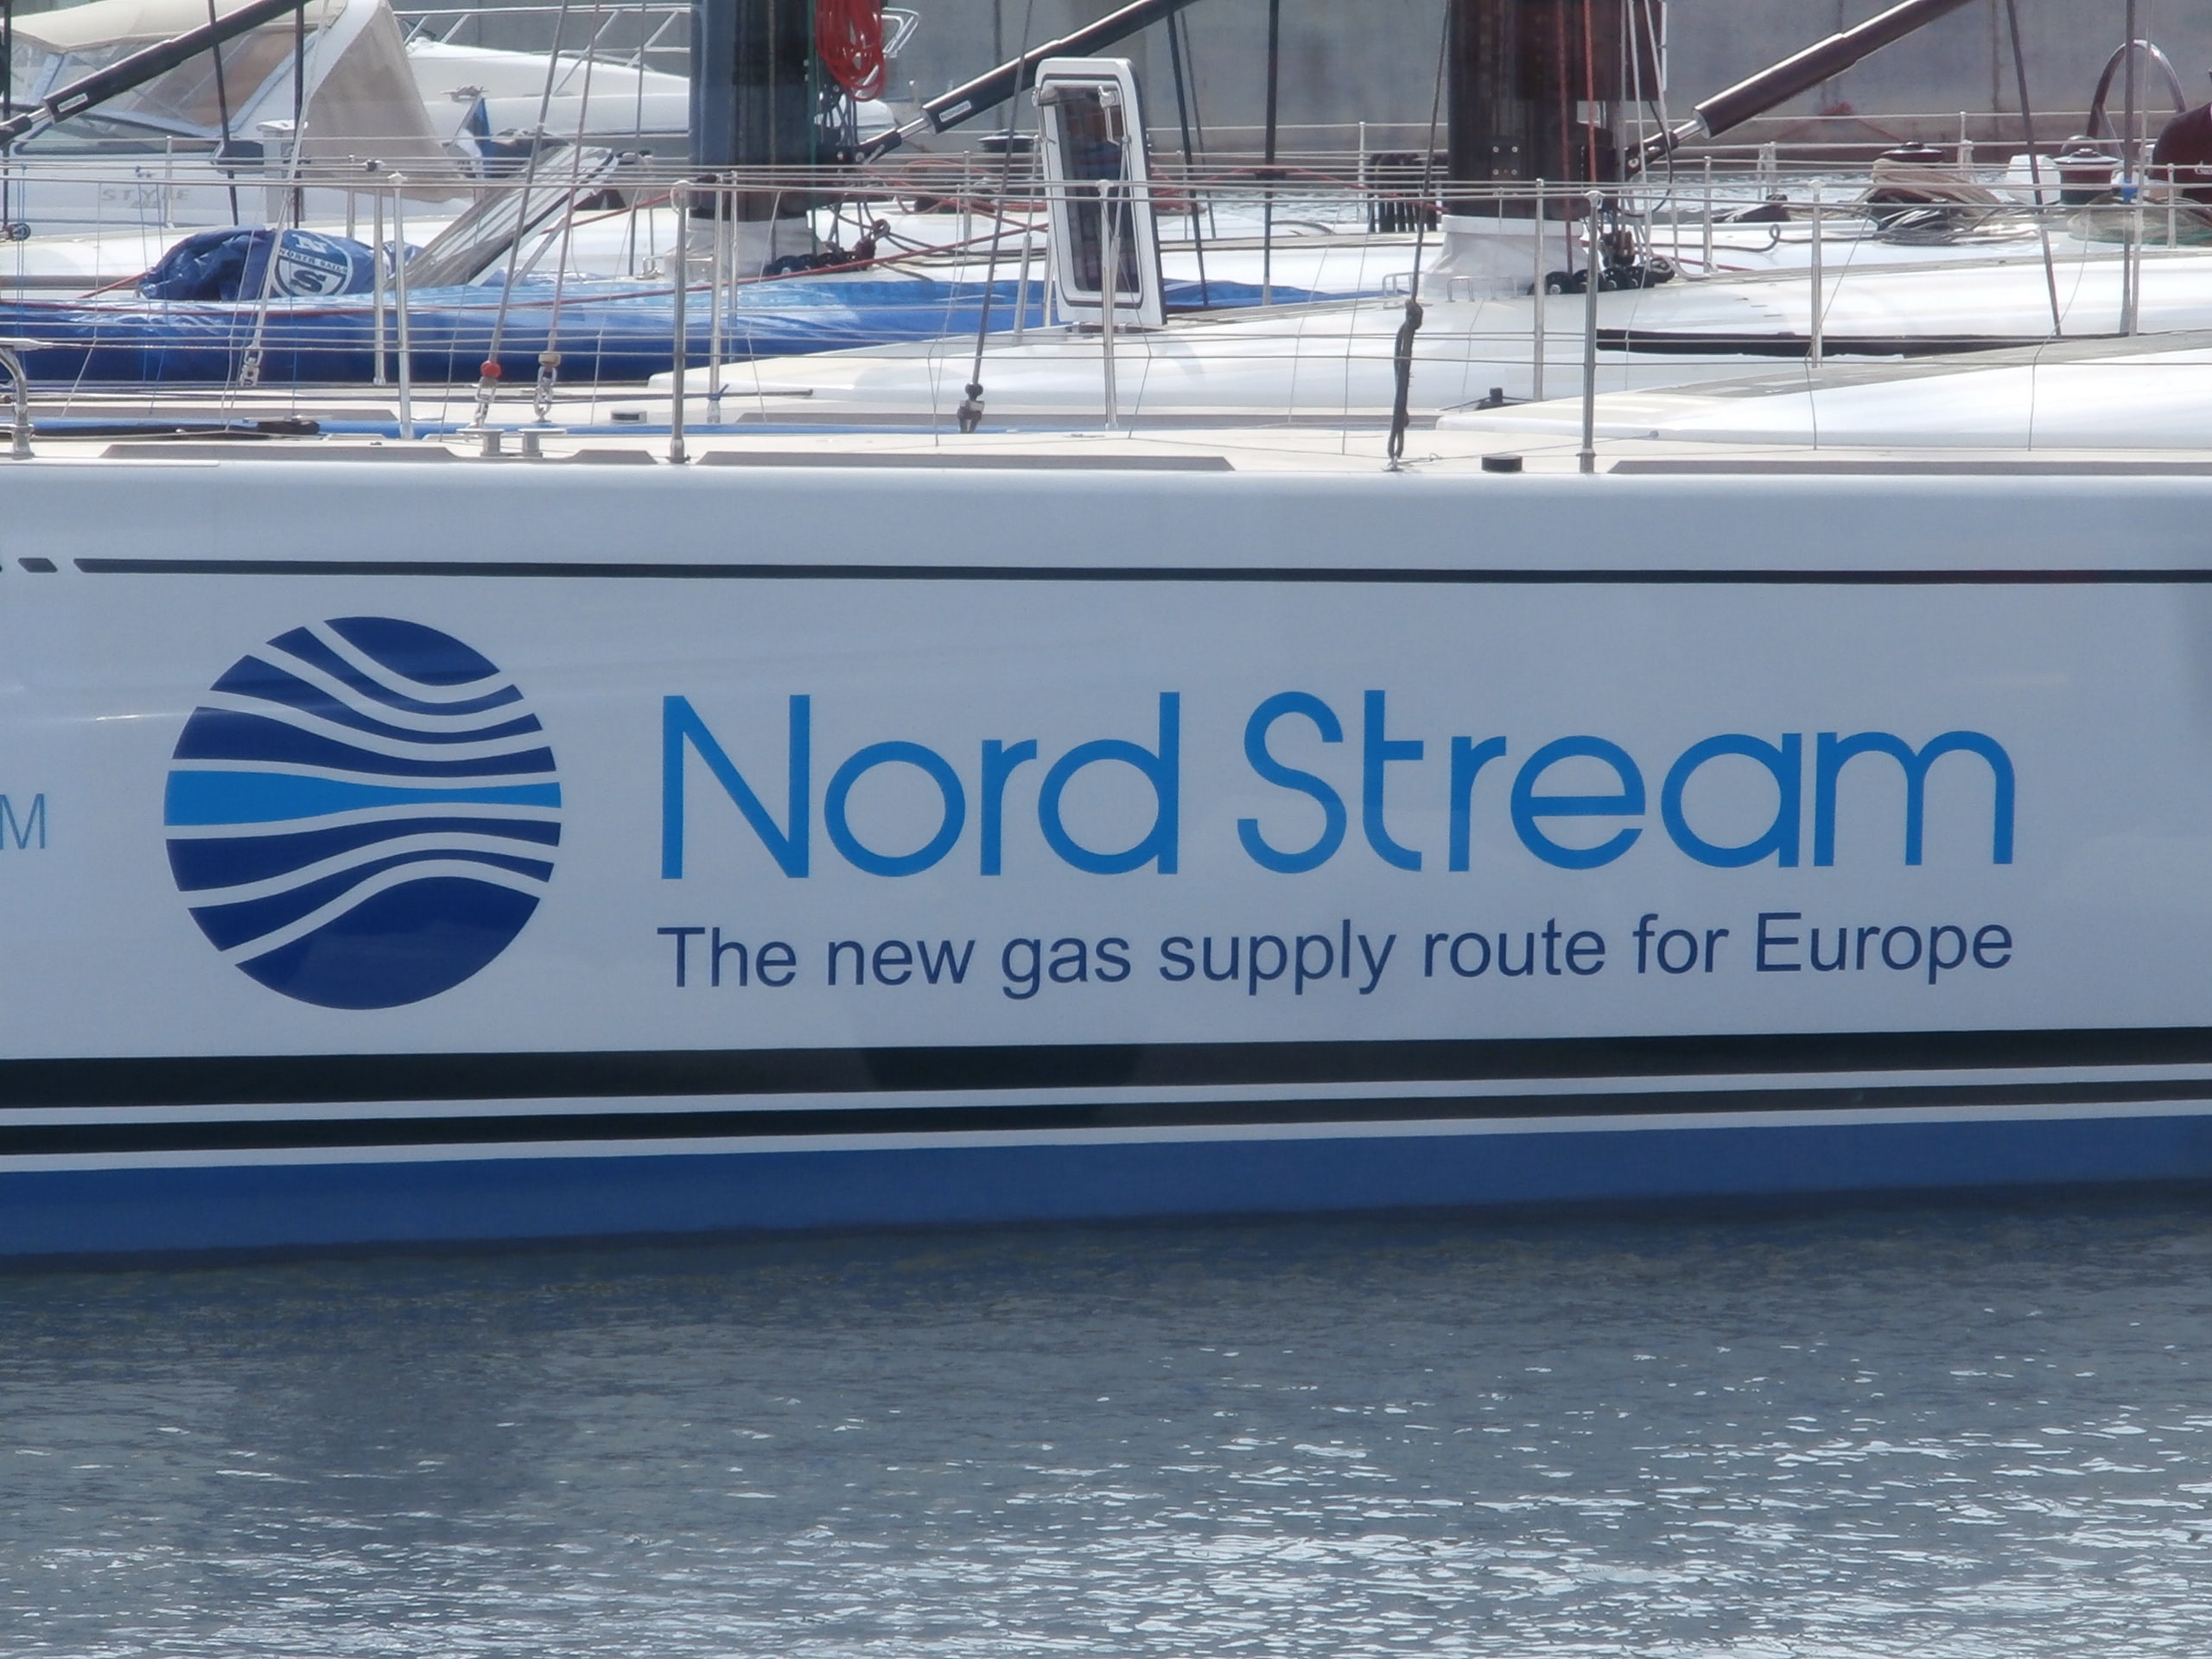 Traces of Explosives Found At Damaged Site Of Nord Stream Pipeline: Report